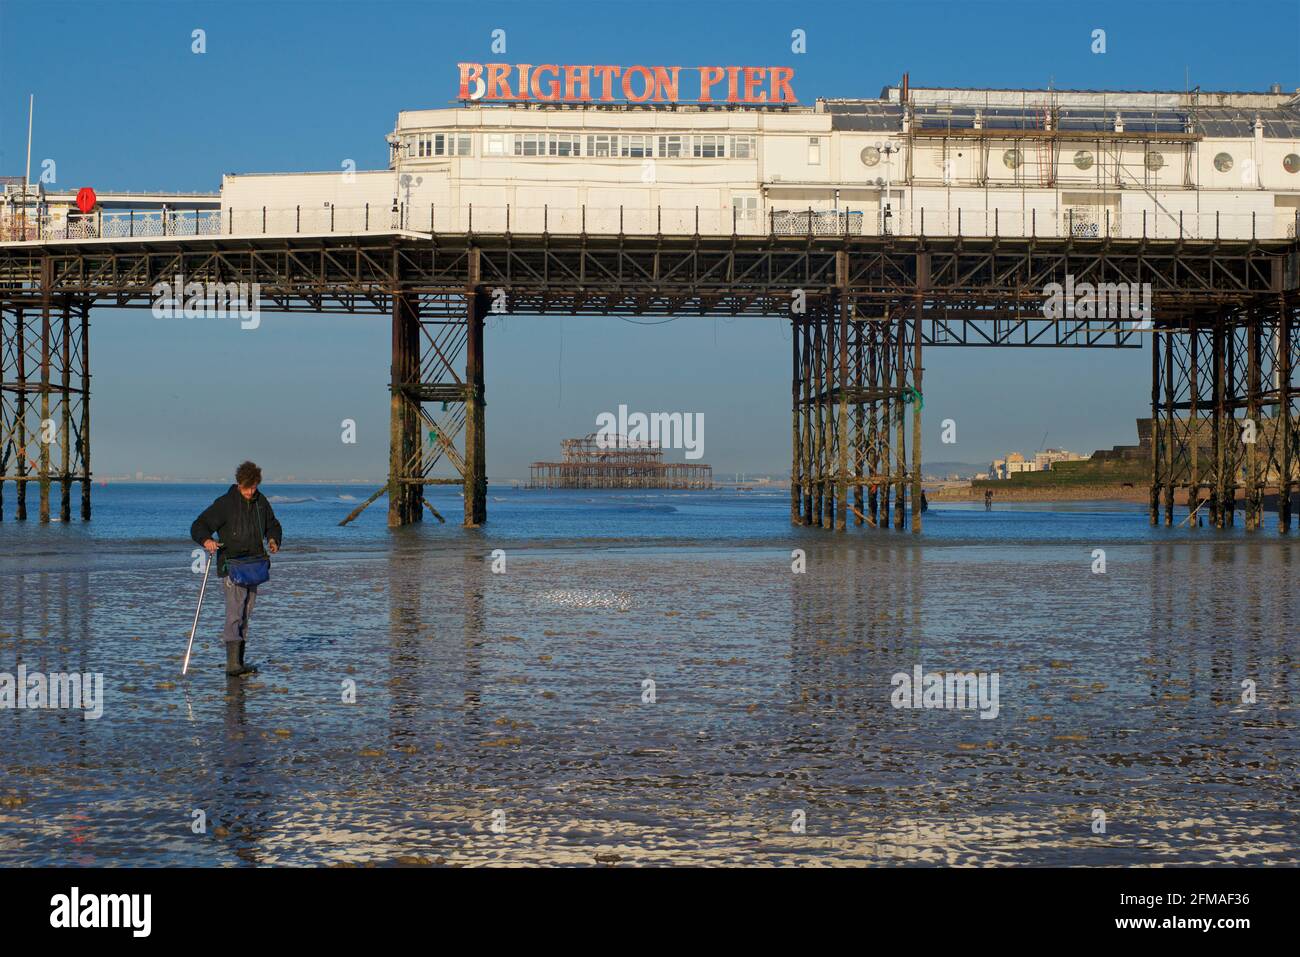 Brighton's dilapidated West Pier framed in the structure of 'Brighton Pier', the Palace Pier. Fisherman collecting ragworm for bait in the foreground. Stock Photo